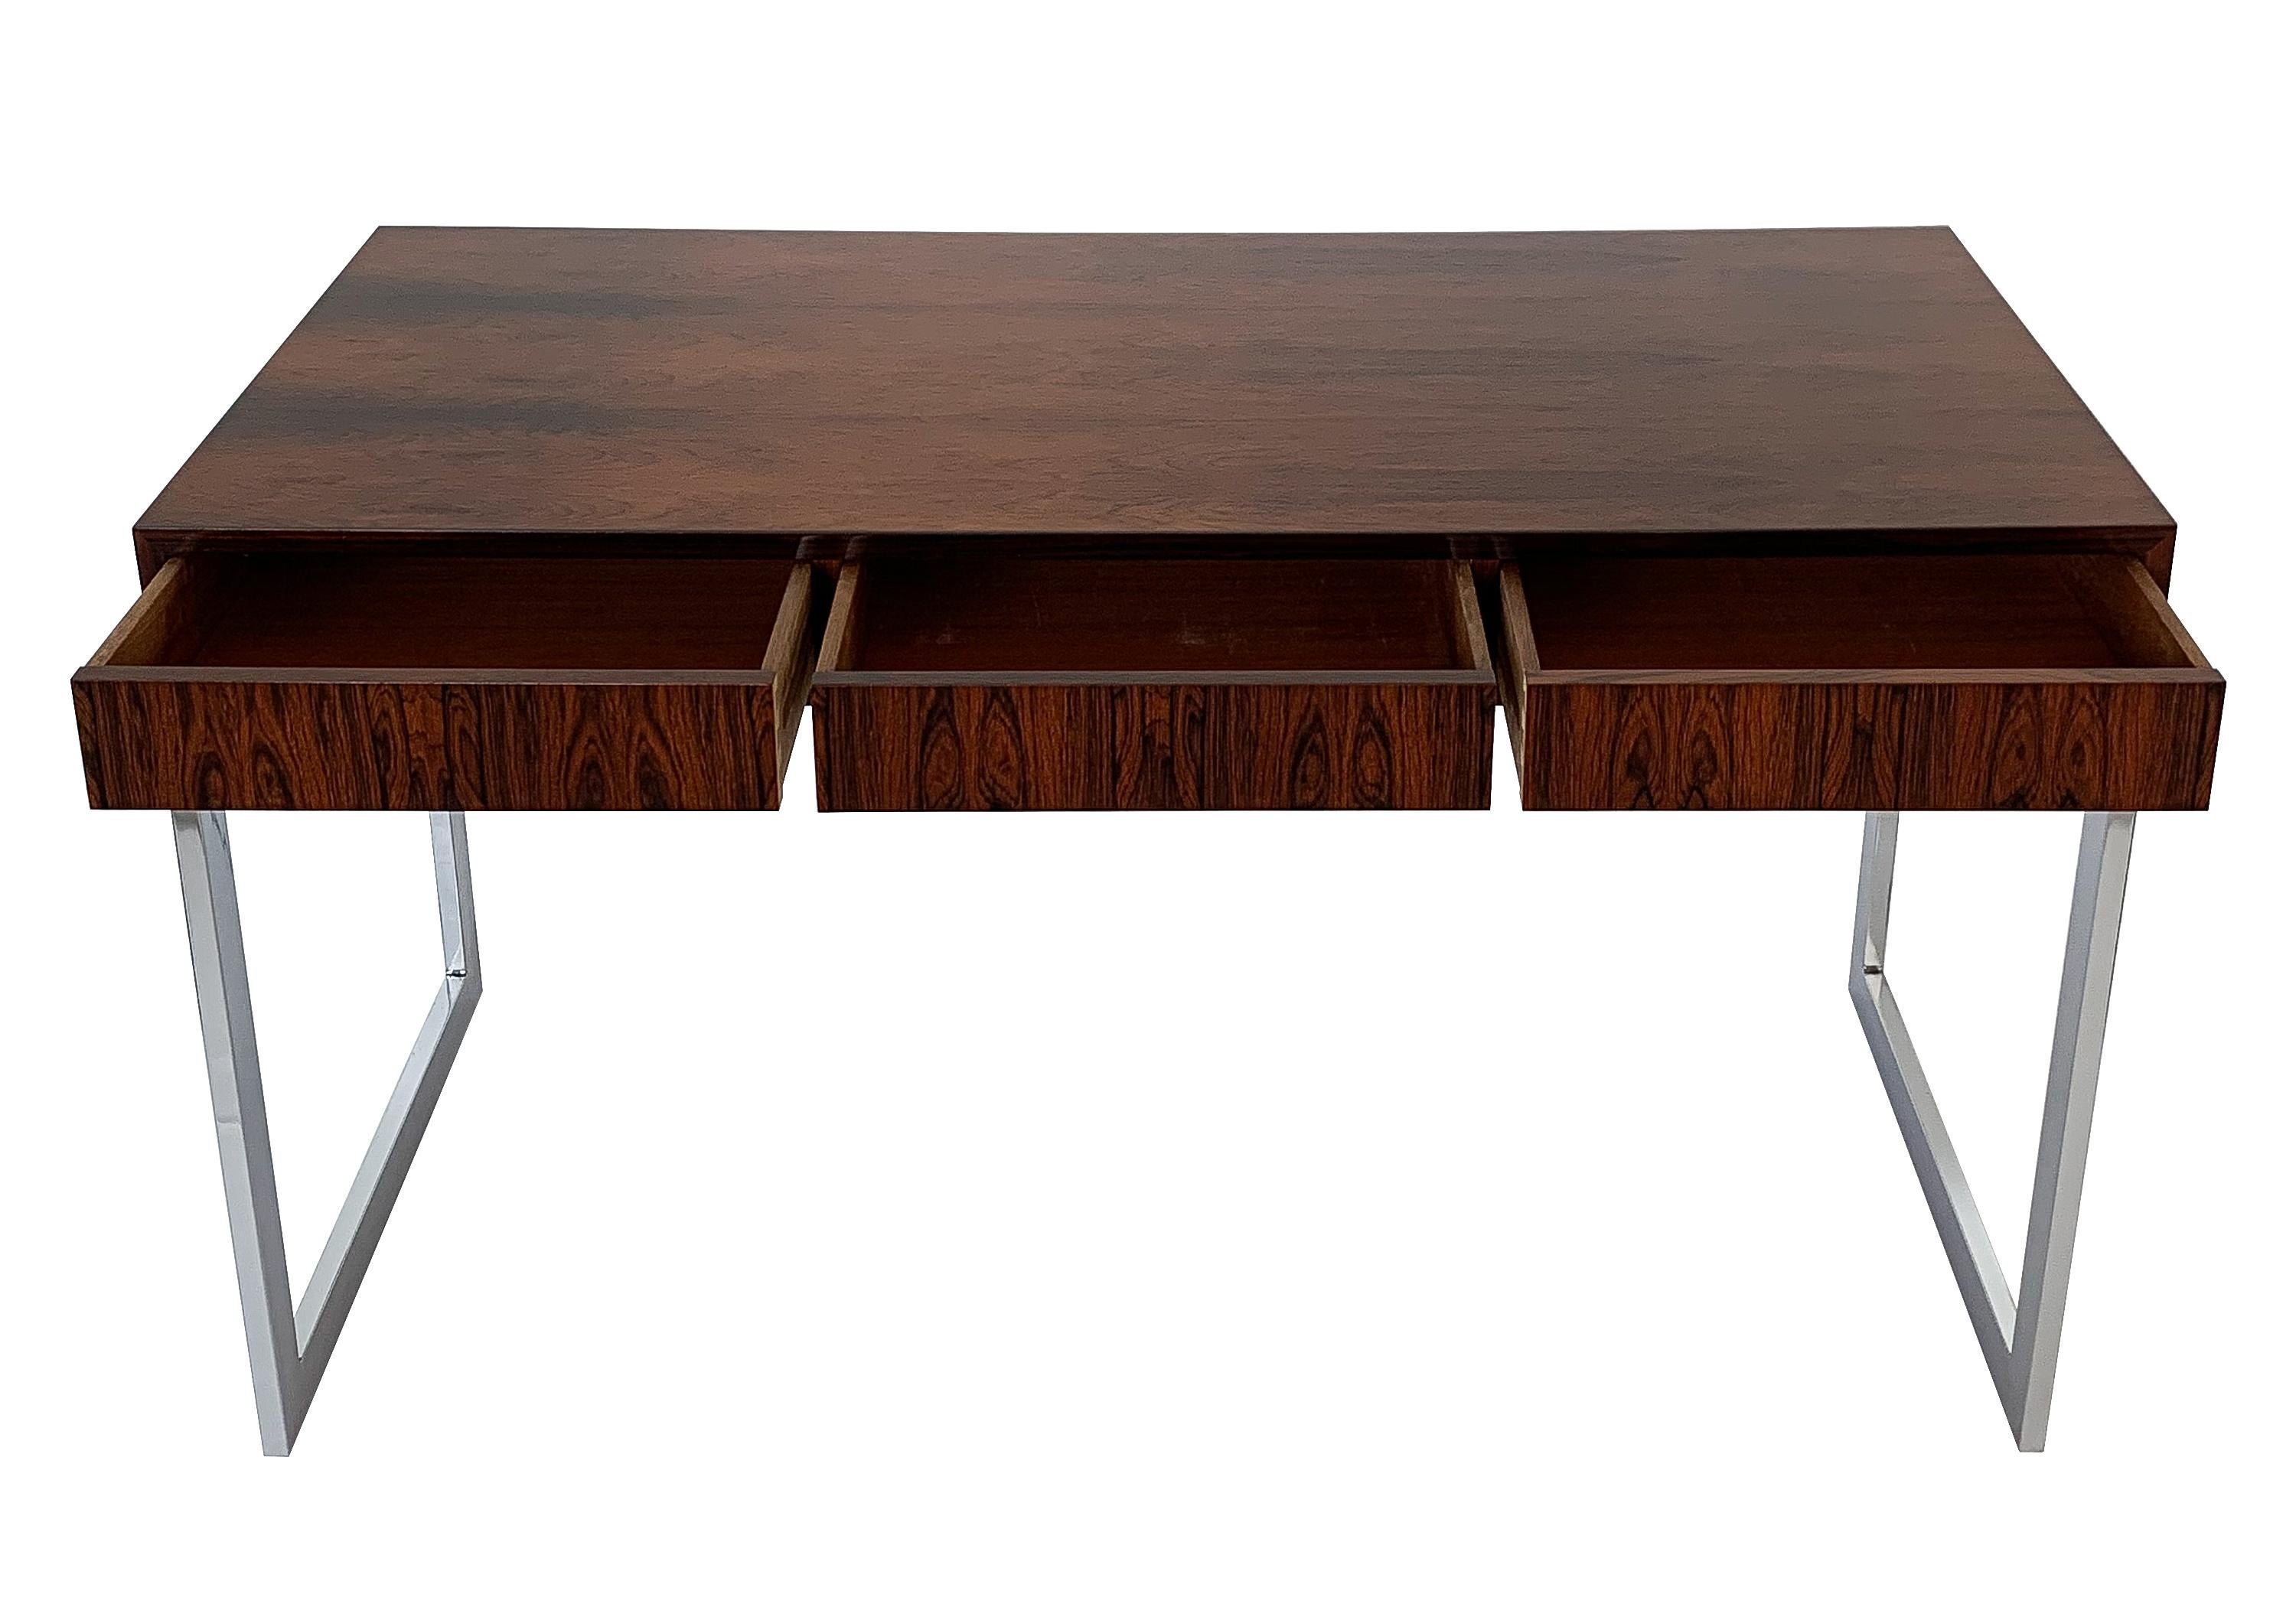 Plated Milo Baughman Rosewood and Chrome Desk